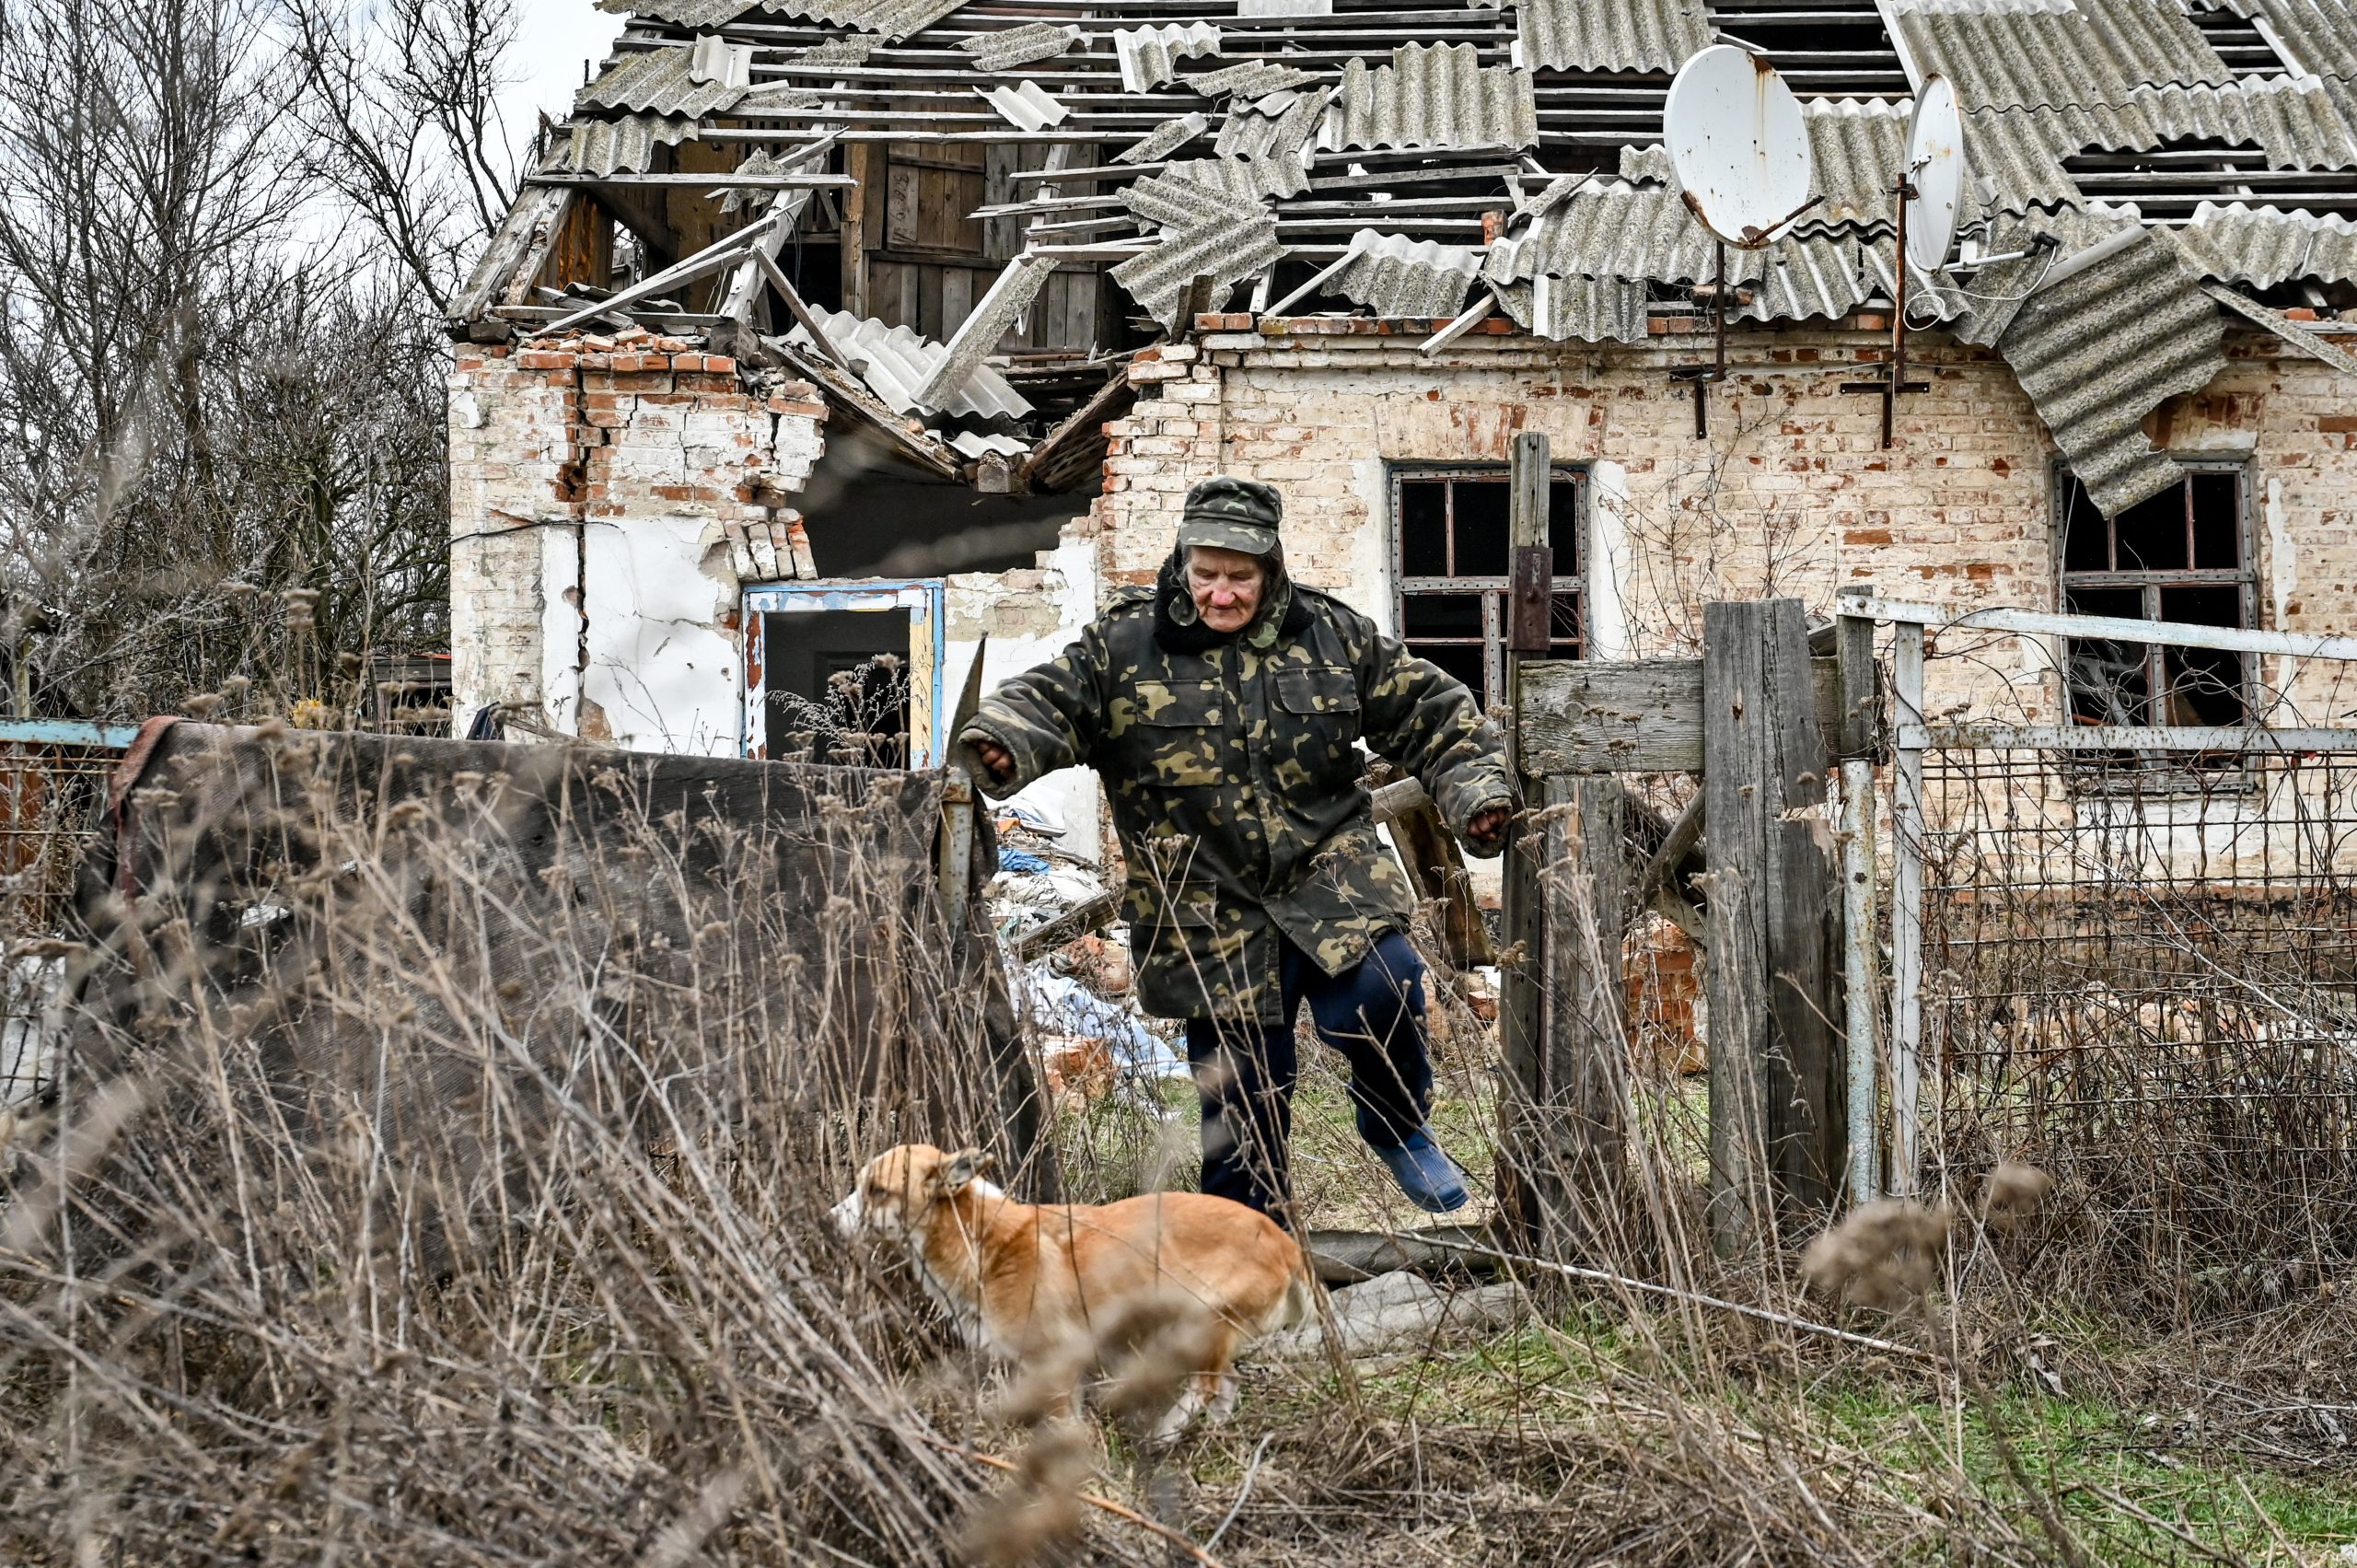 Photo: An old man and a dog are pictured outside a home destroyed in the shelling of Russian troops, Zaliznychne village, Zaporizhzhia Region, southeastern Ukraine. Credit:Dmytro Smolienko/NURPHOTO via Reuters Connect.